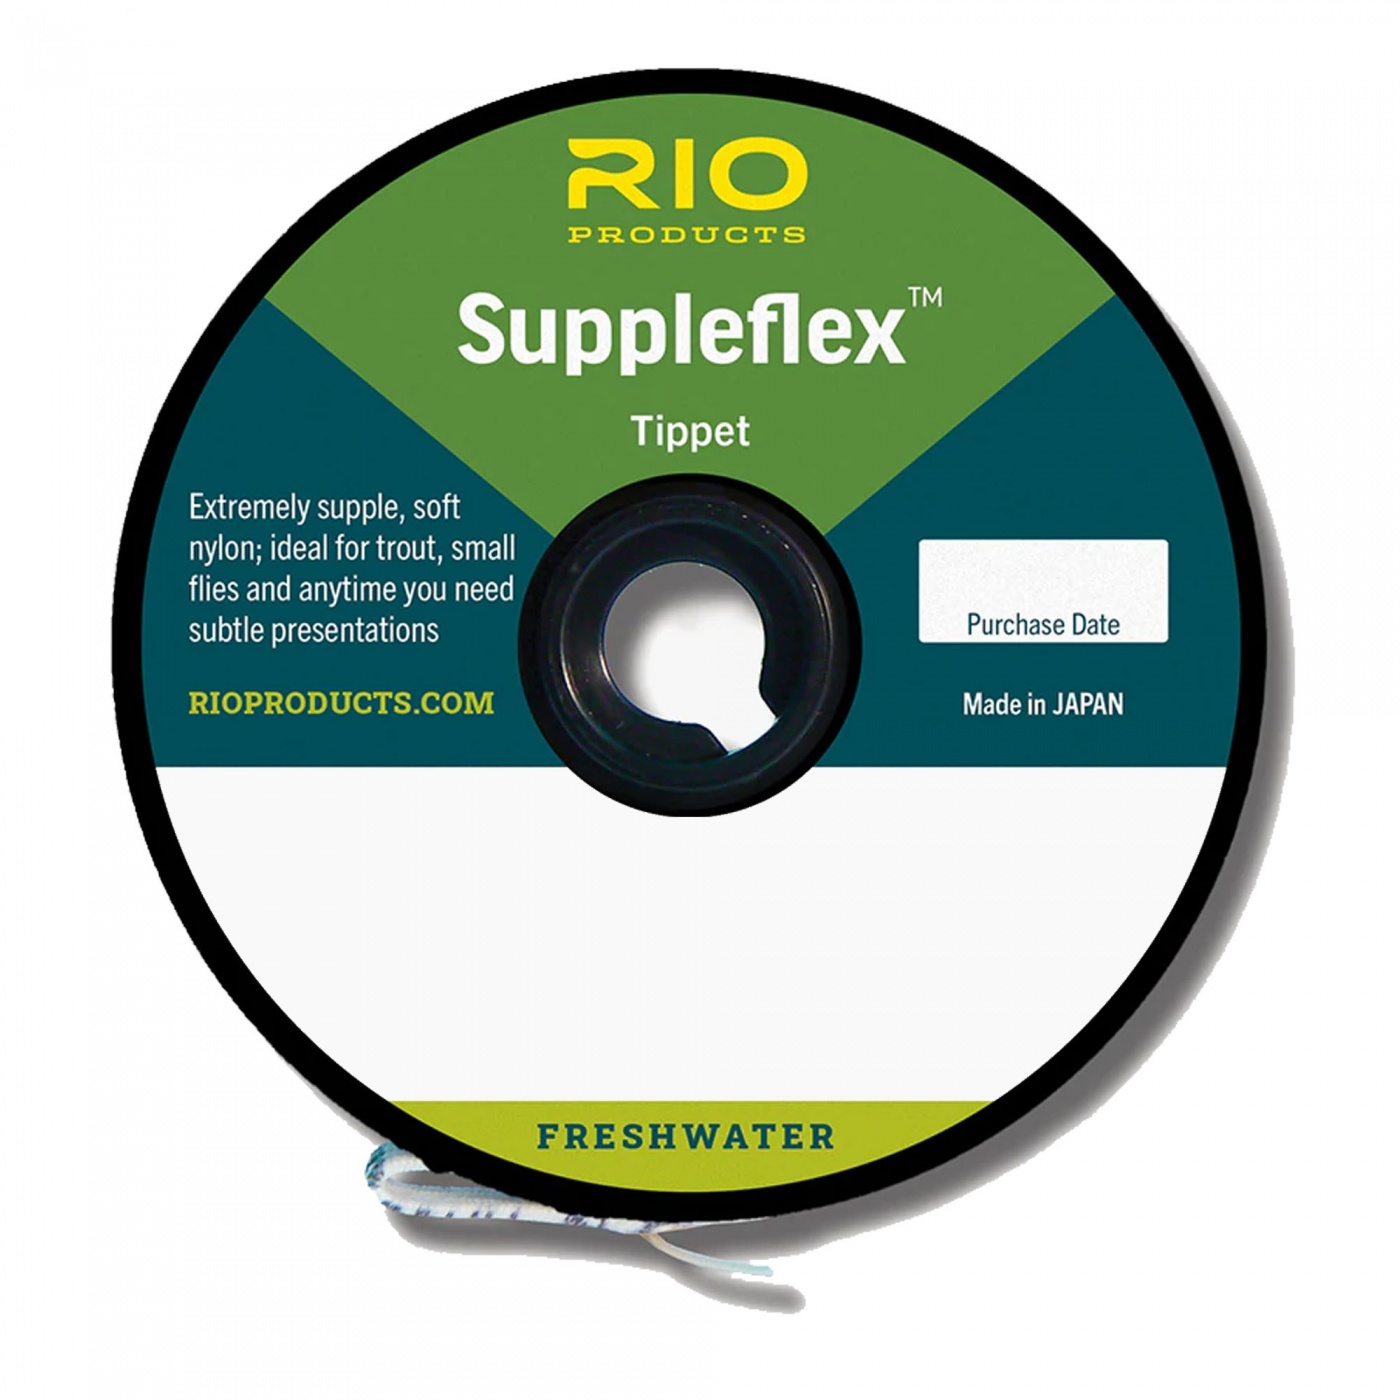 Rio Products Suppleflex Tippet 7X 2.0lb / 0.9kg For Fly Fishing